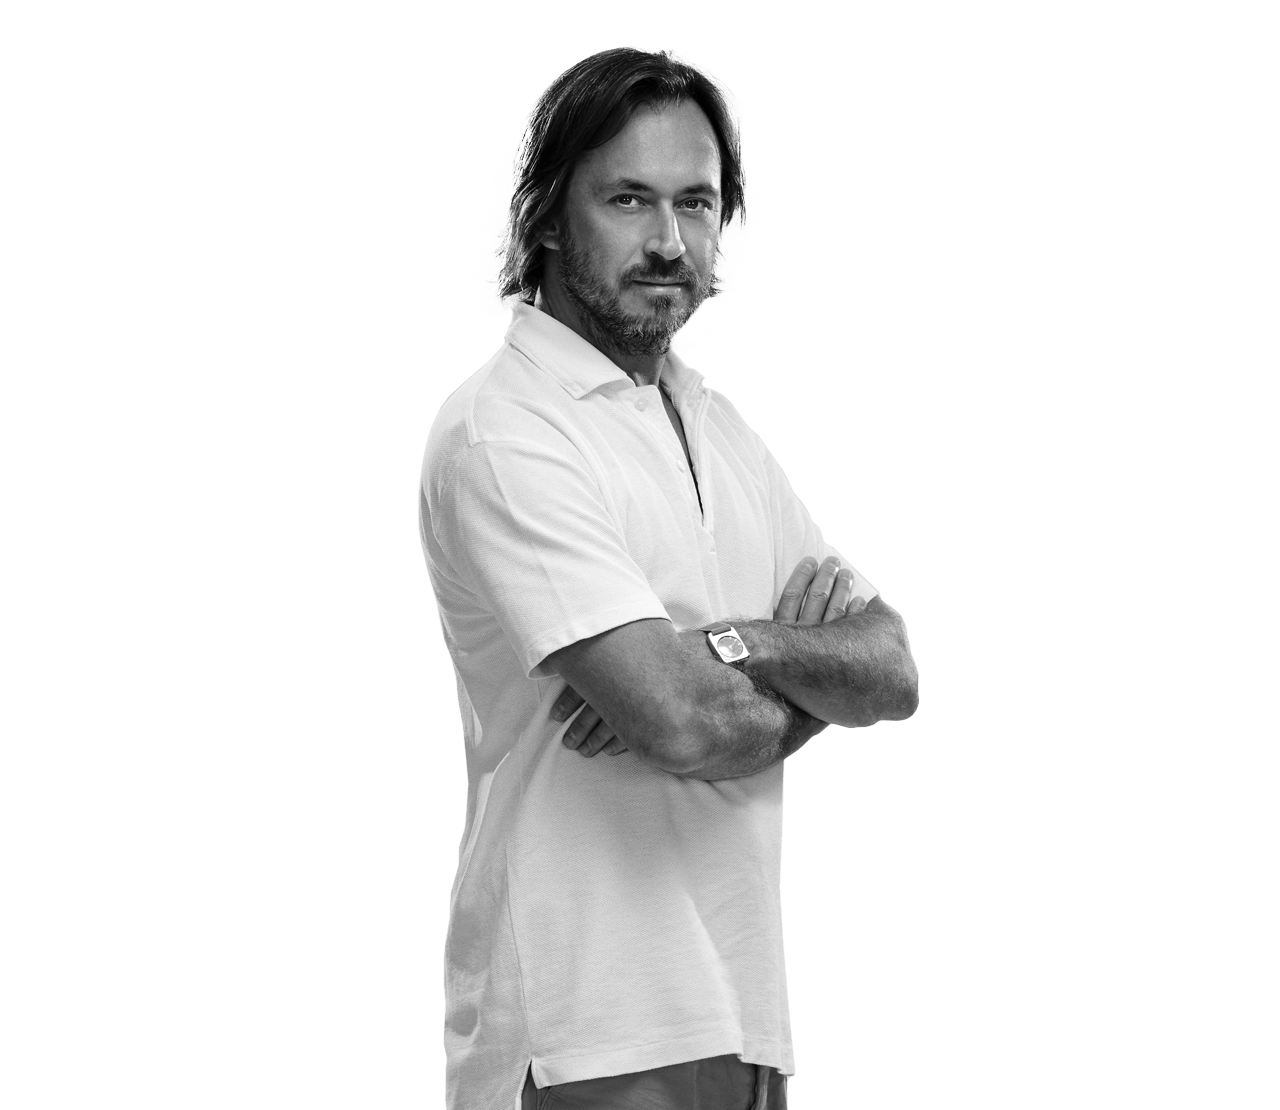 Marc Newson to Join Jonathan Ive's Design Team at Apple - iClarified